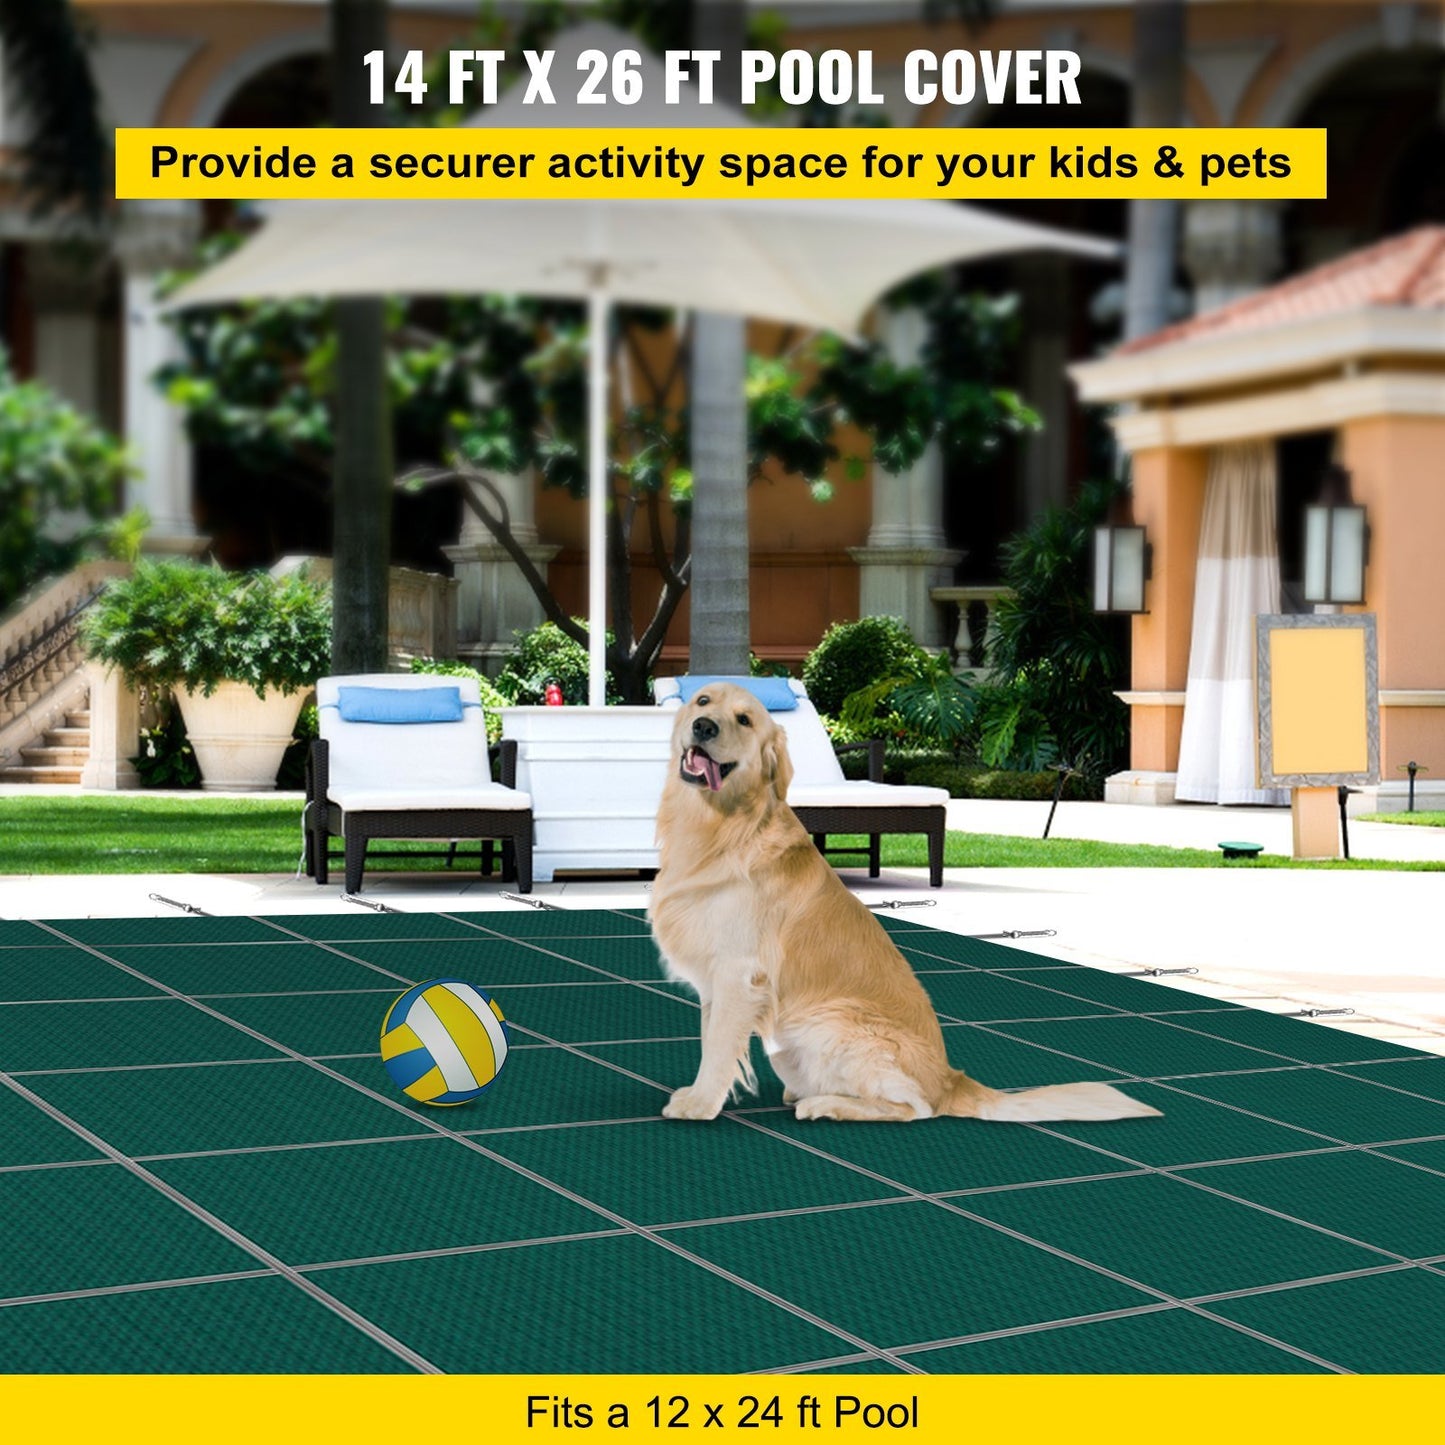 VEVOR Inground Pool Saftey Cover, 14 x 26 ft Rectangular Winter Pool Cover, Triple Stitched, High Strength Mesh PP Material With Good Rain Permeability, Installation Hardware Included, Green